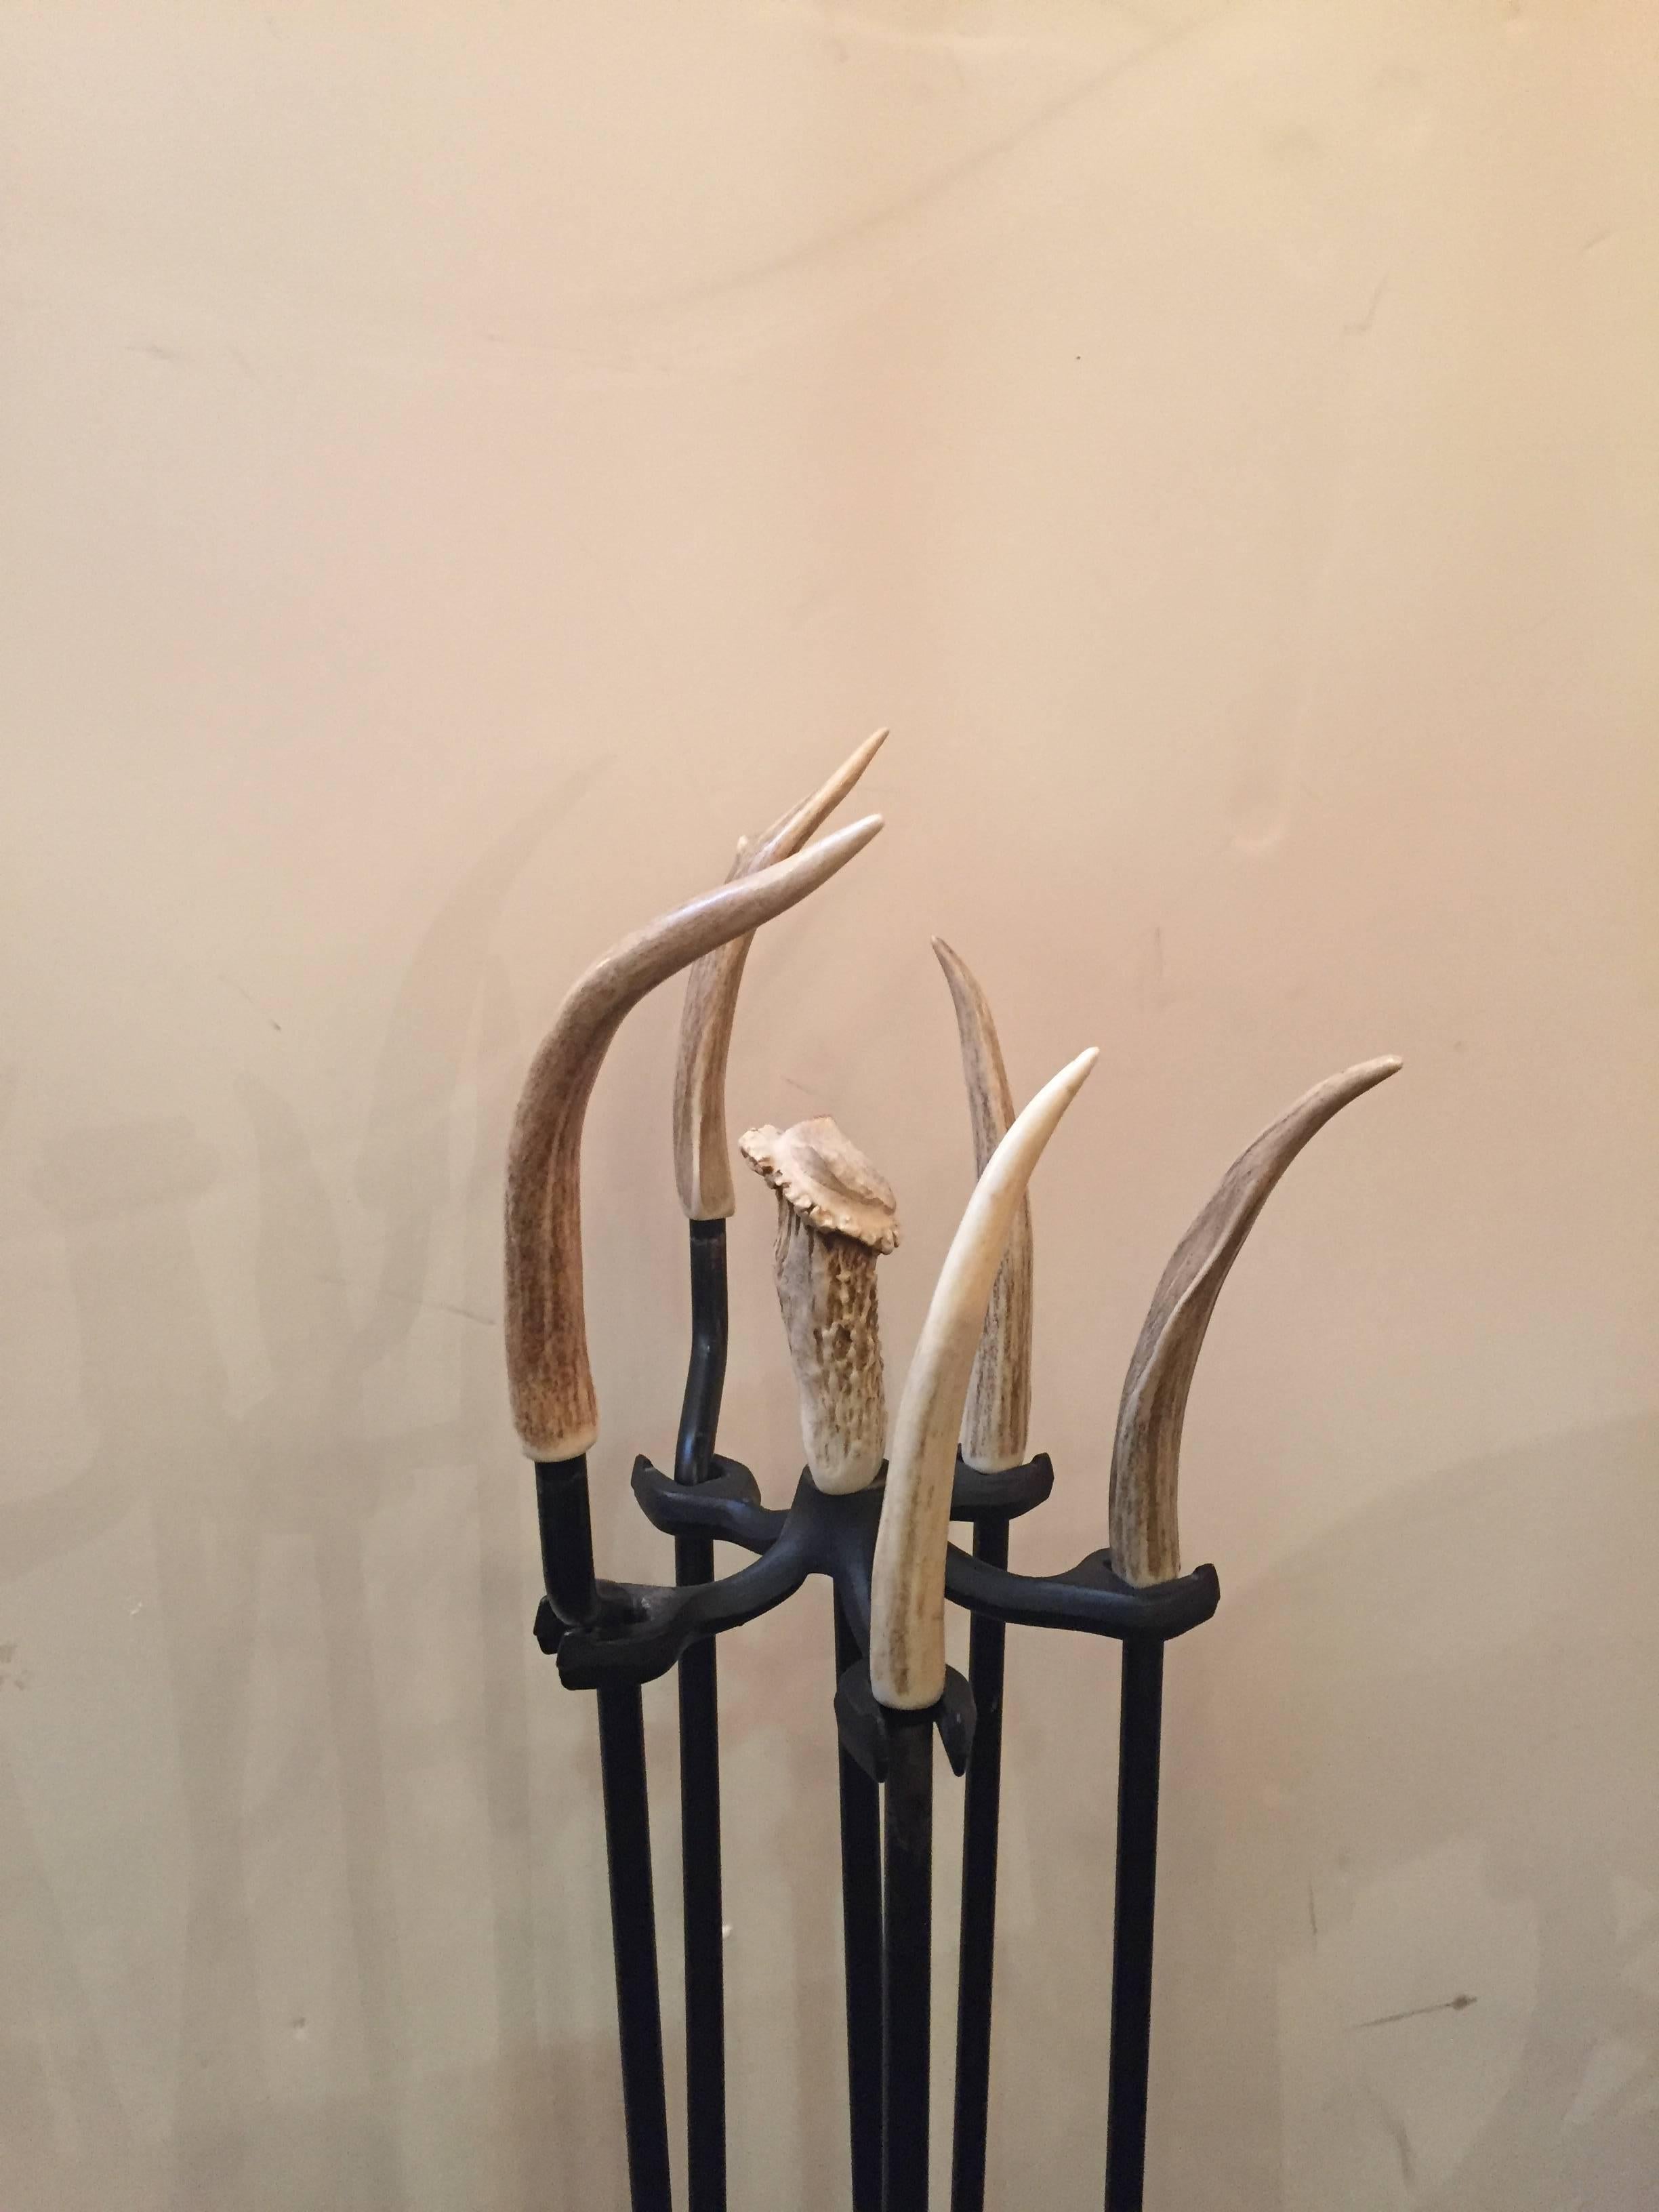 Fabulous iron fireplace tools with real antler handles and base. Includes four tools: Broom, shovel, poker and log turner.